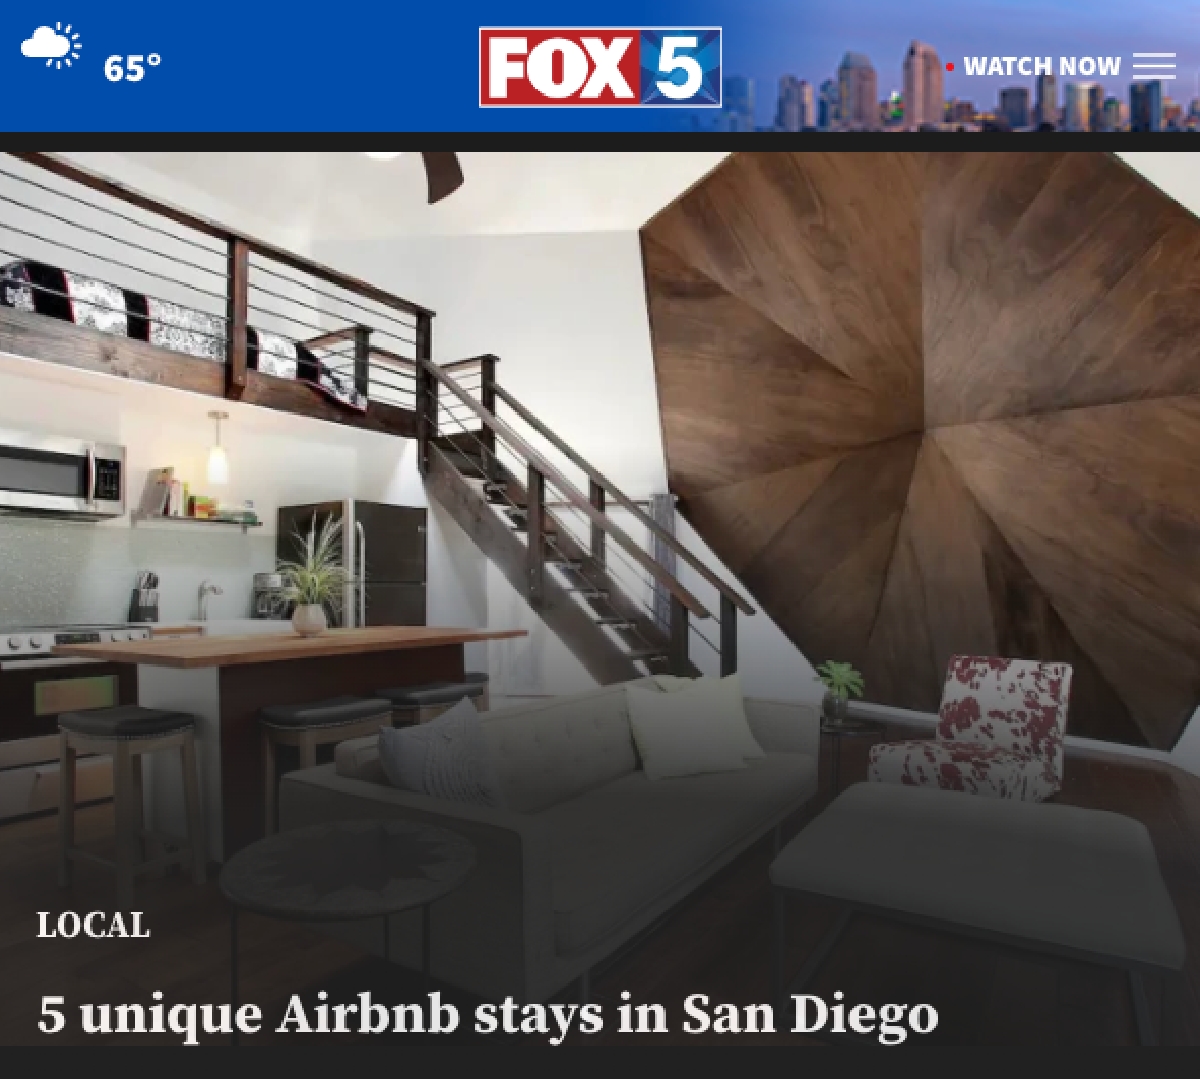 Our Guest House Was Featured As One of 5 Unique Airbnb Stays In San Diego!